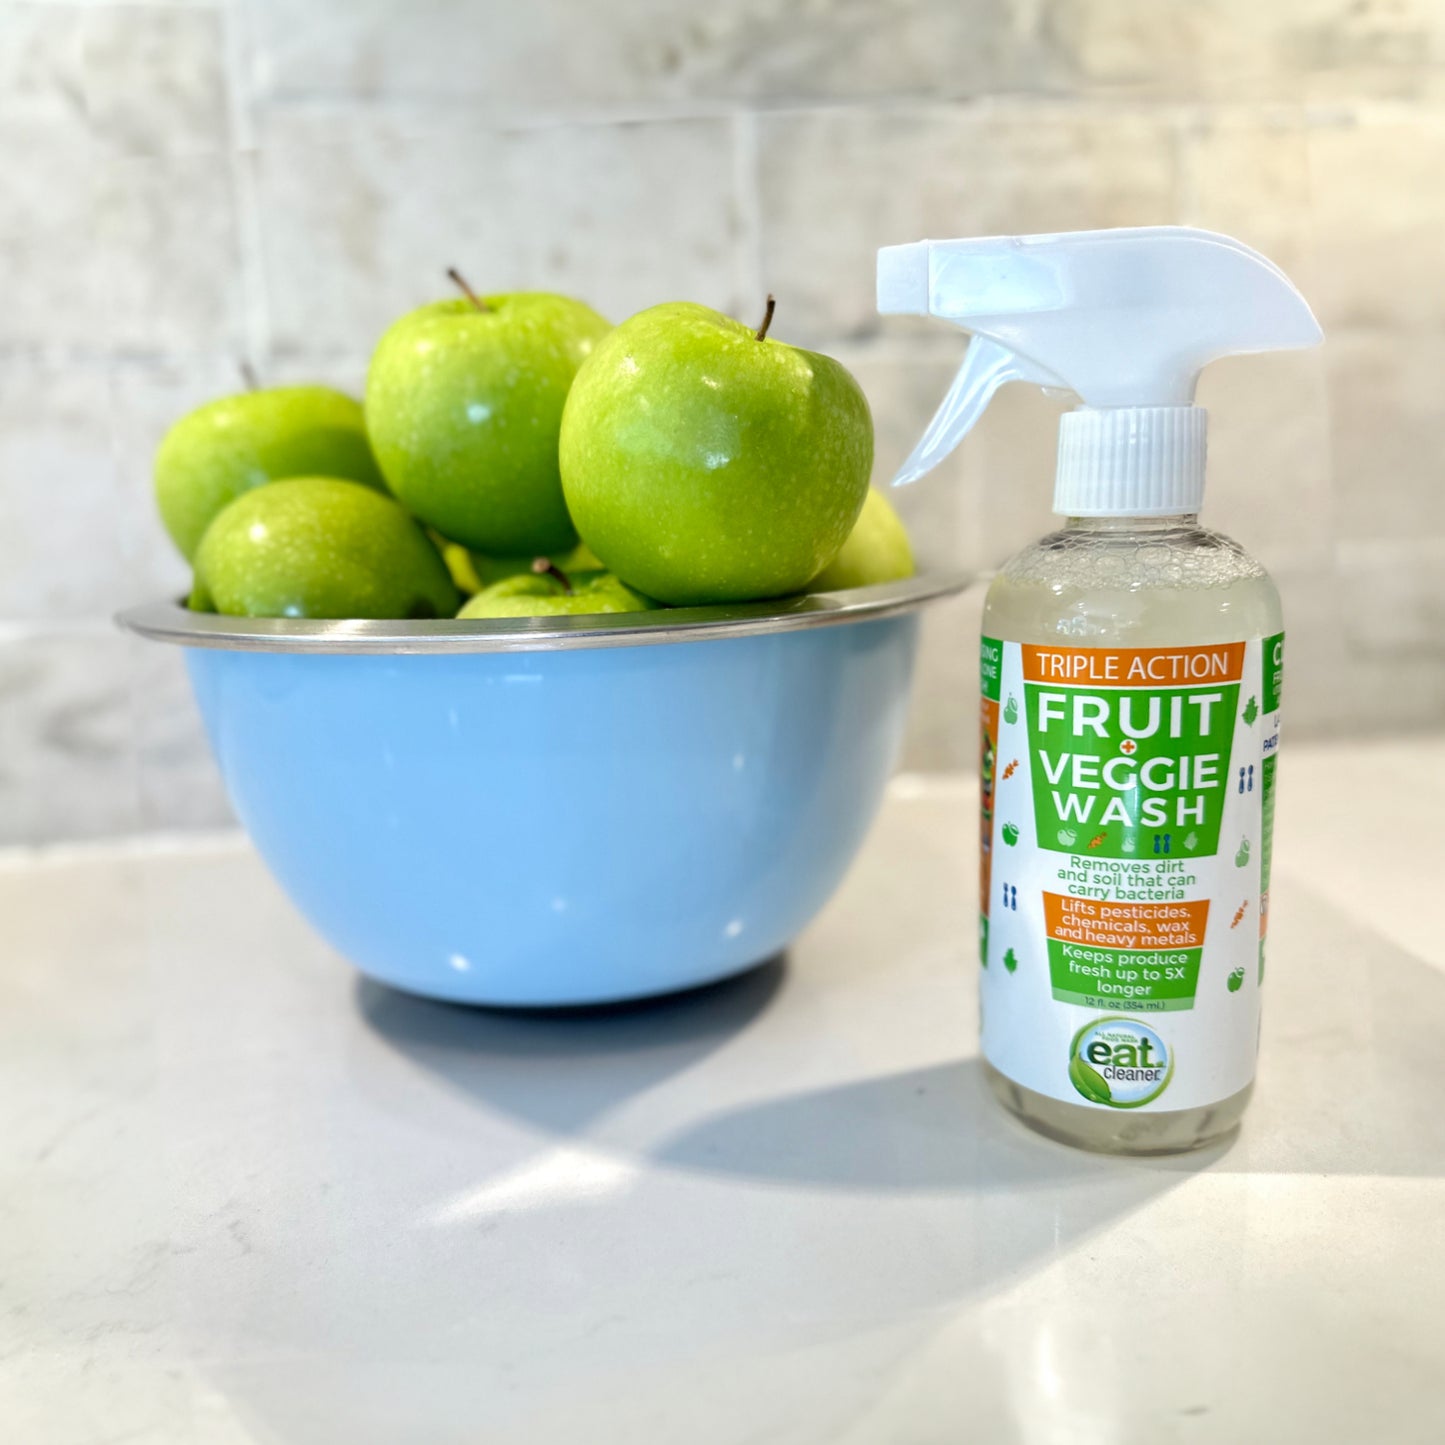 MI Fruit and Vegetable Cleaner removes pesticides and bacteria 